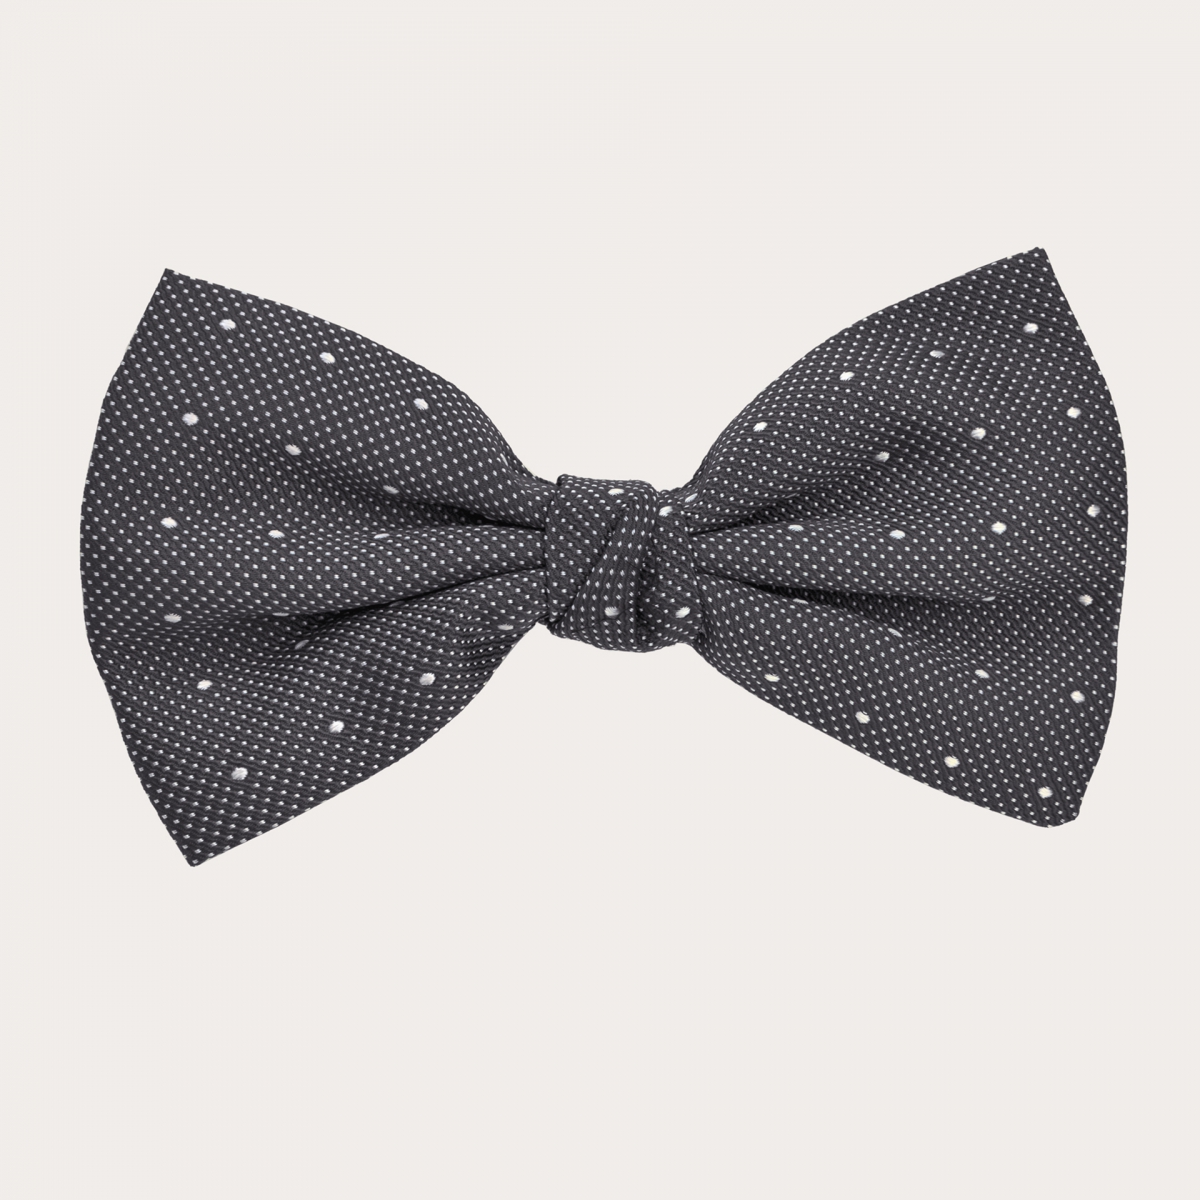 BRUCLE Suspenders and bow tie set in grey dotted silk